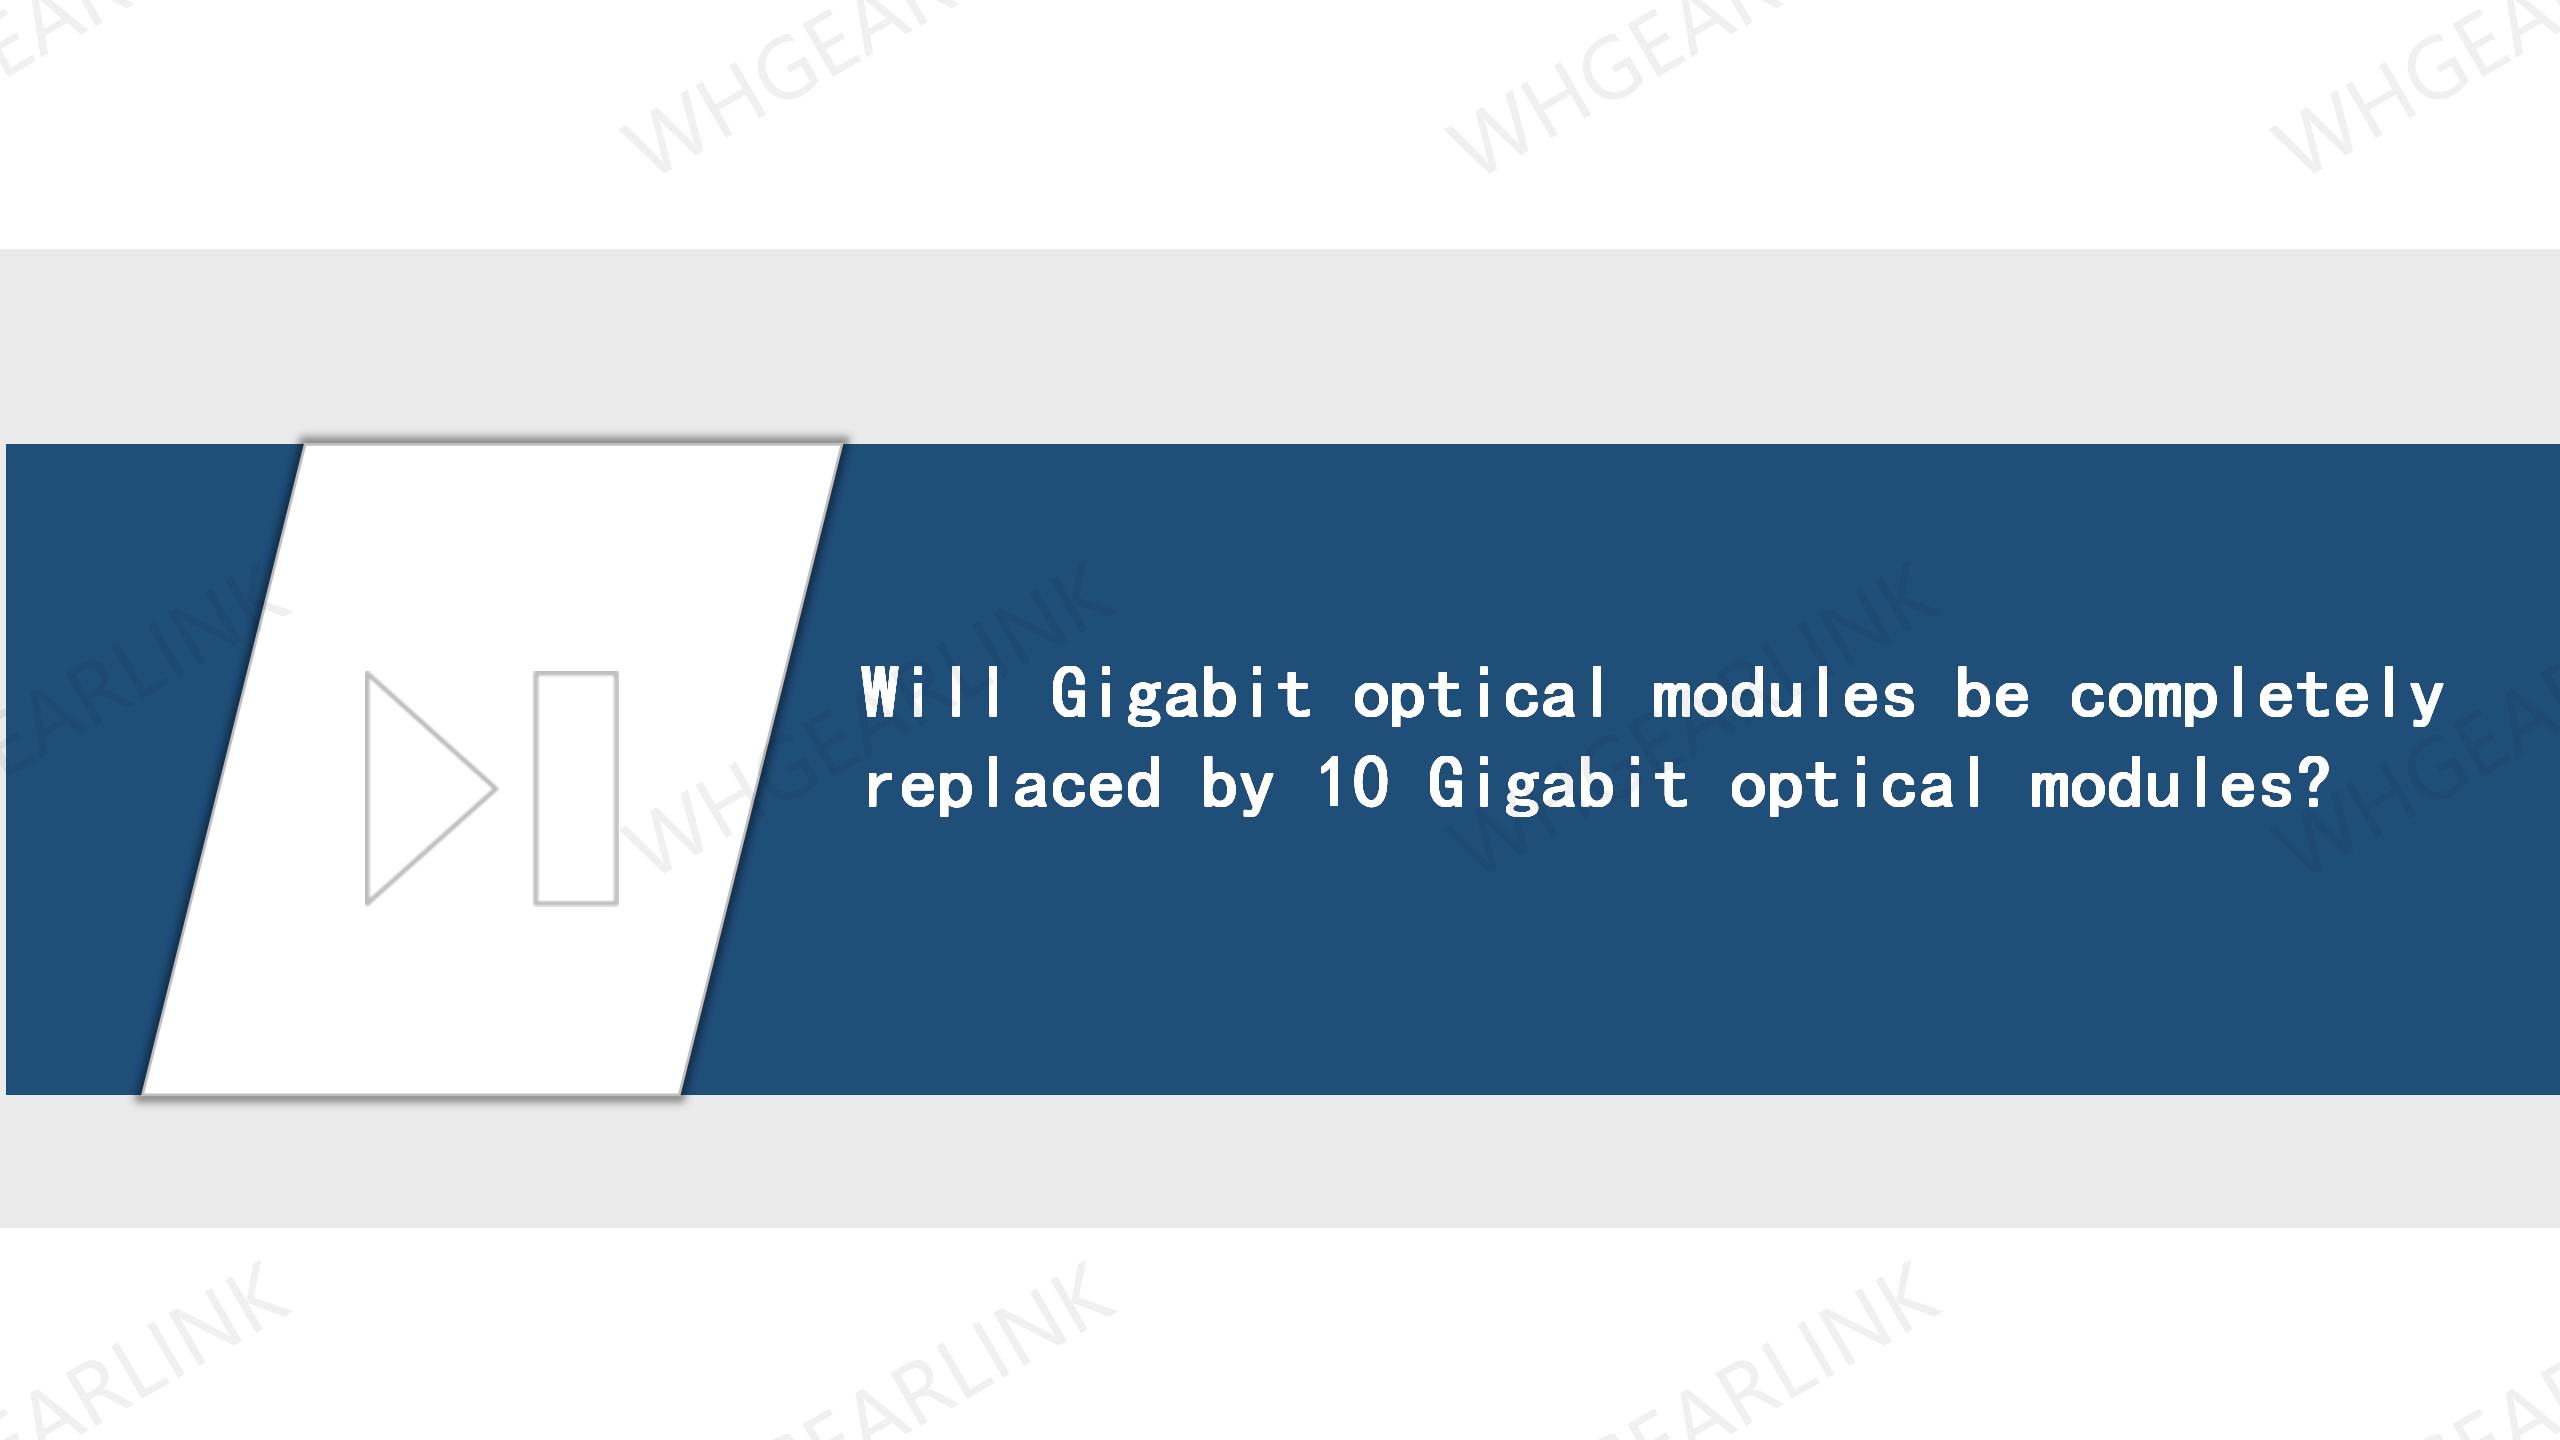 Will Gigabit optical modules be completely replaced by 10 Gigabit optical modules?